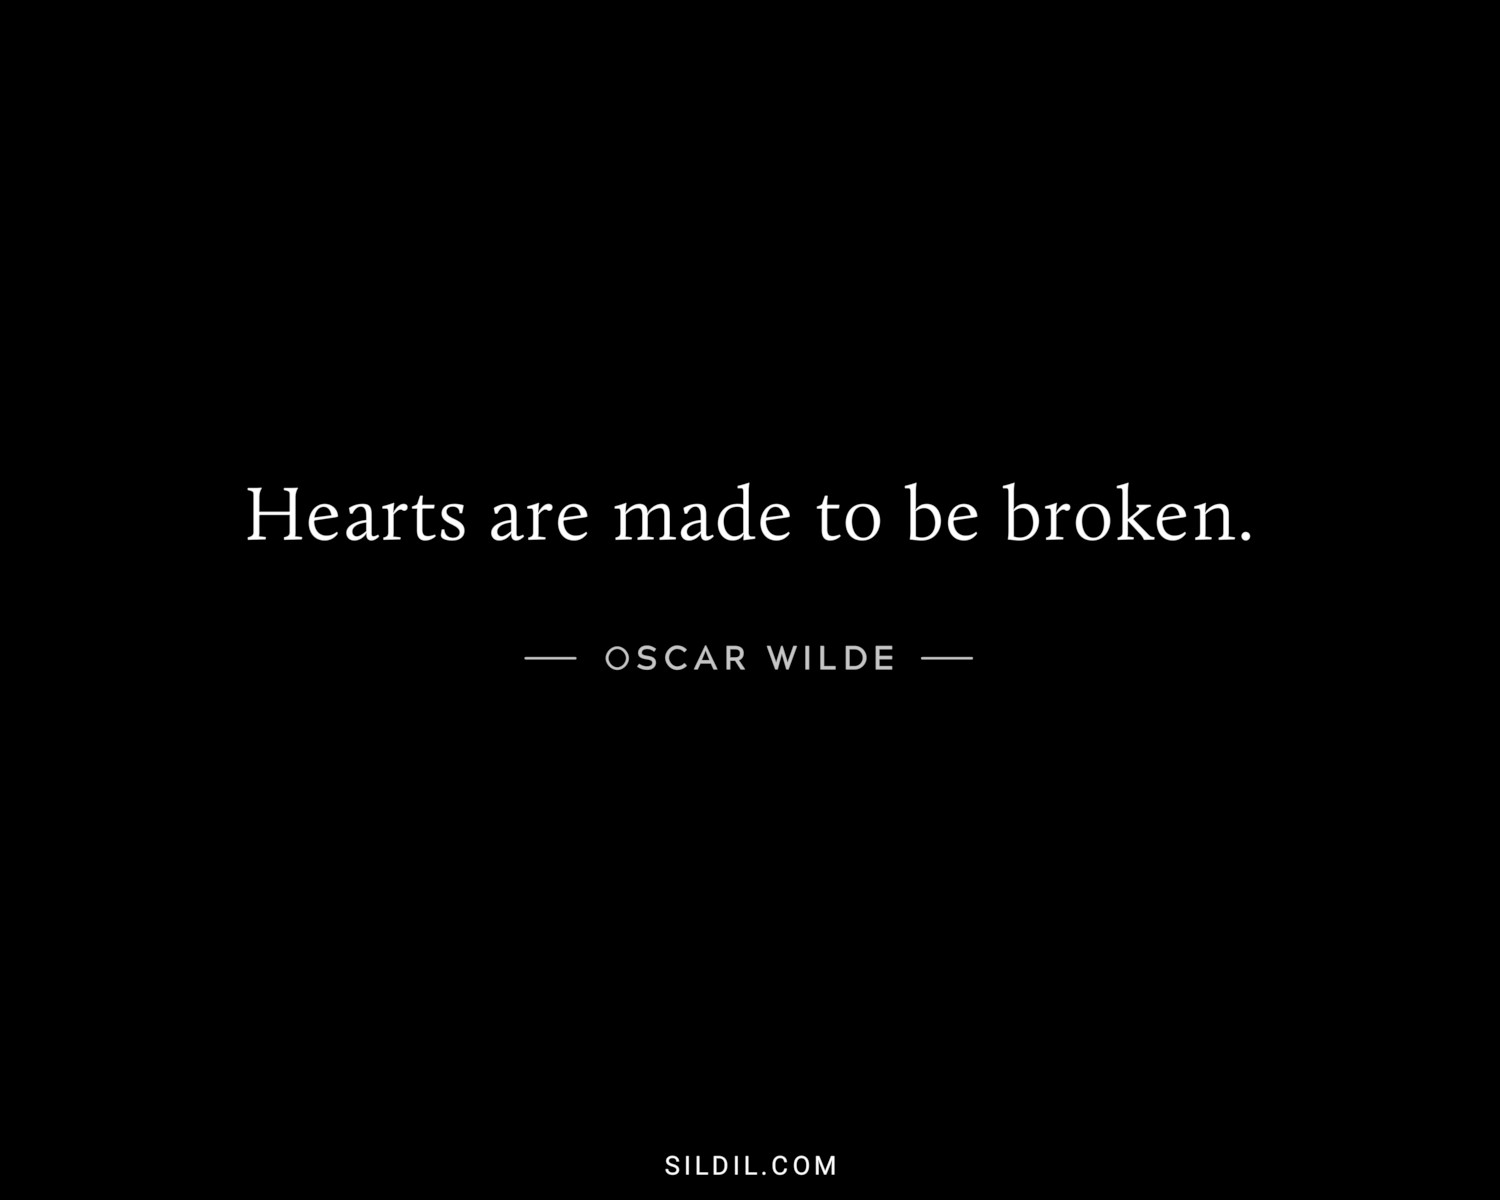 Hearts are made to be broken.